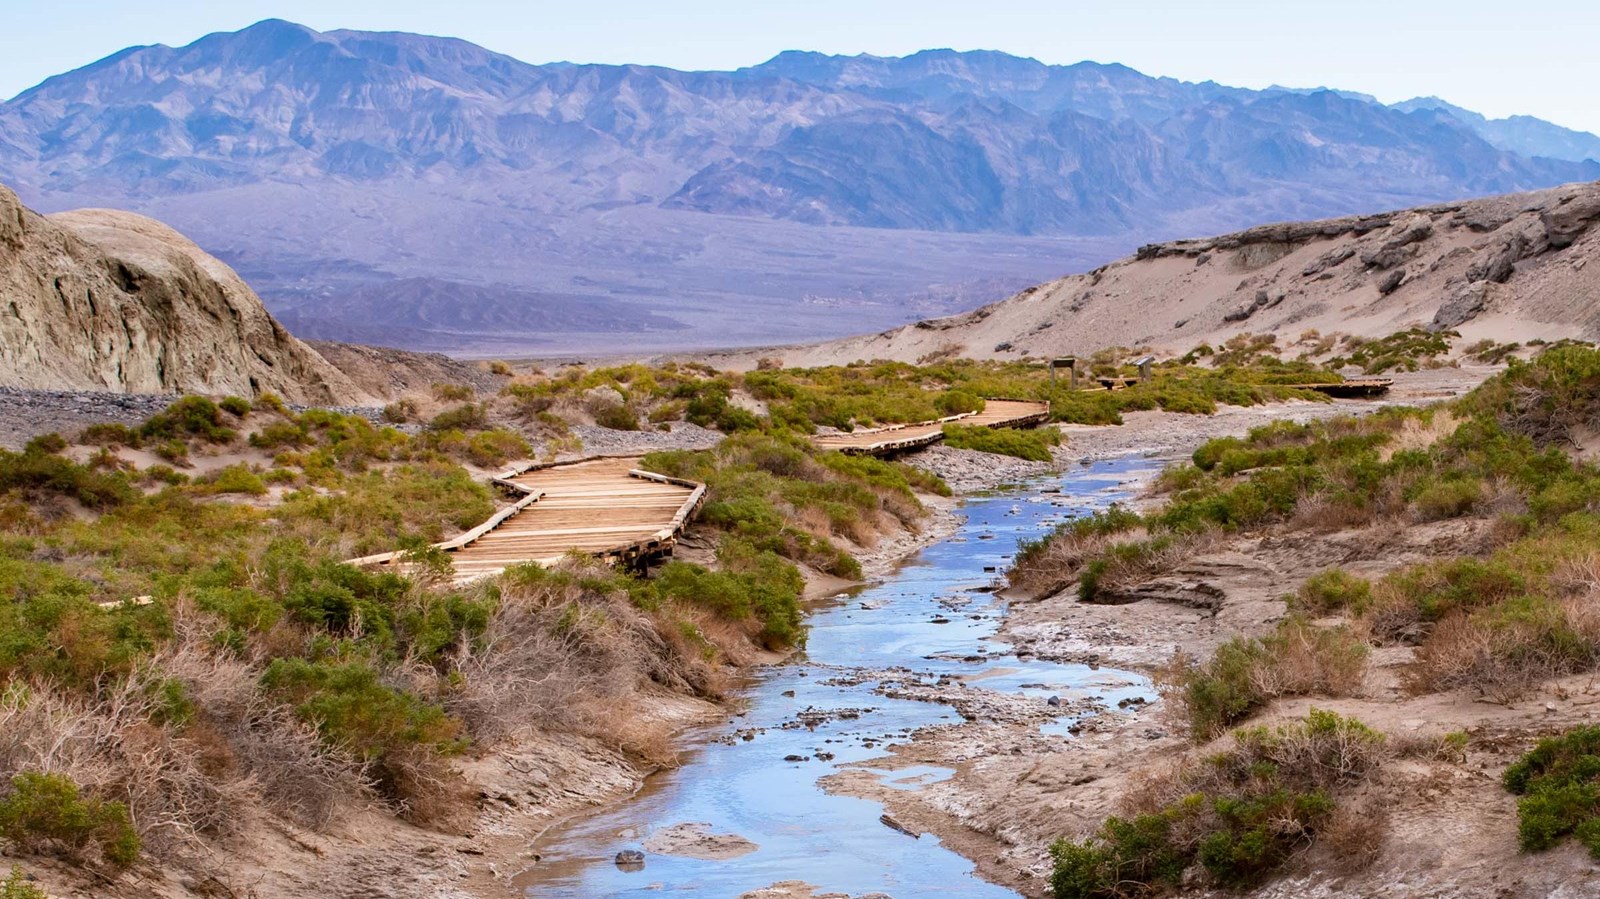 A winding wooden boardwalk parallels a small creek surrounded by low green desert plants.